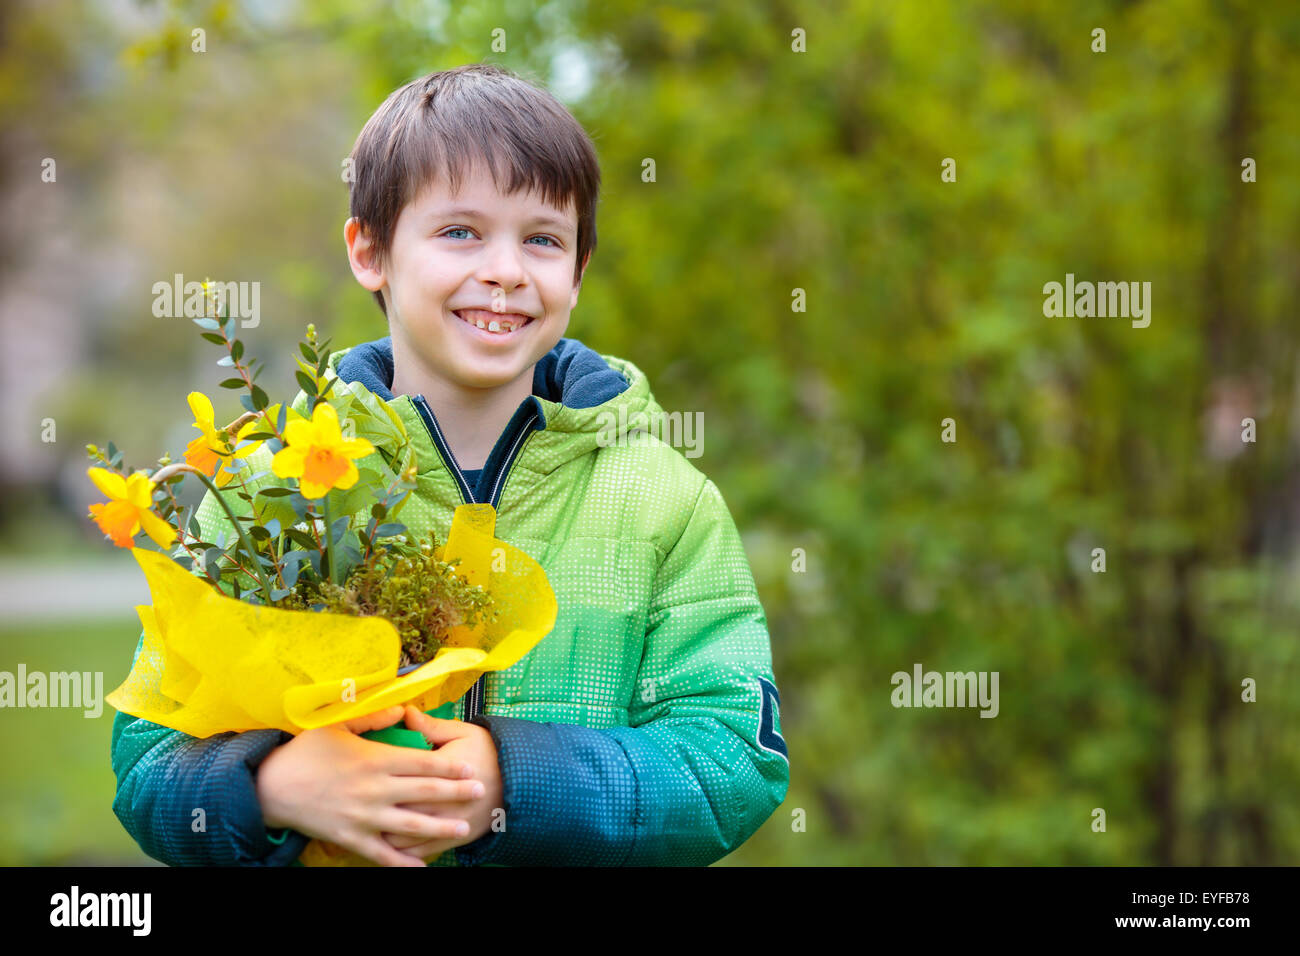 Cute smiling boy holding daffodils Stock Photo